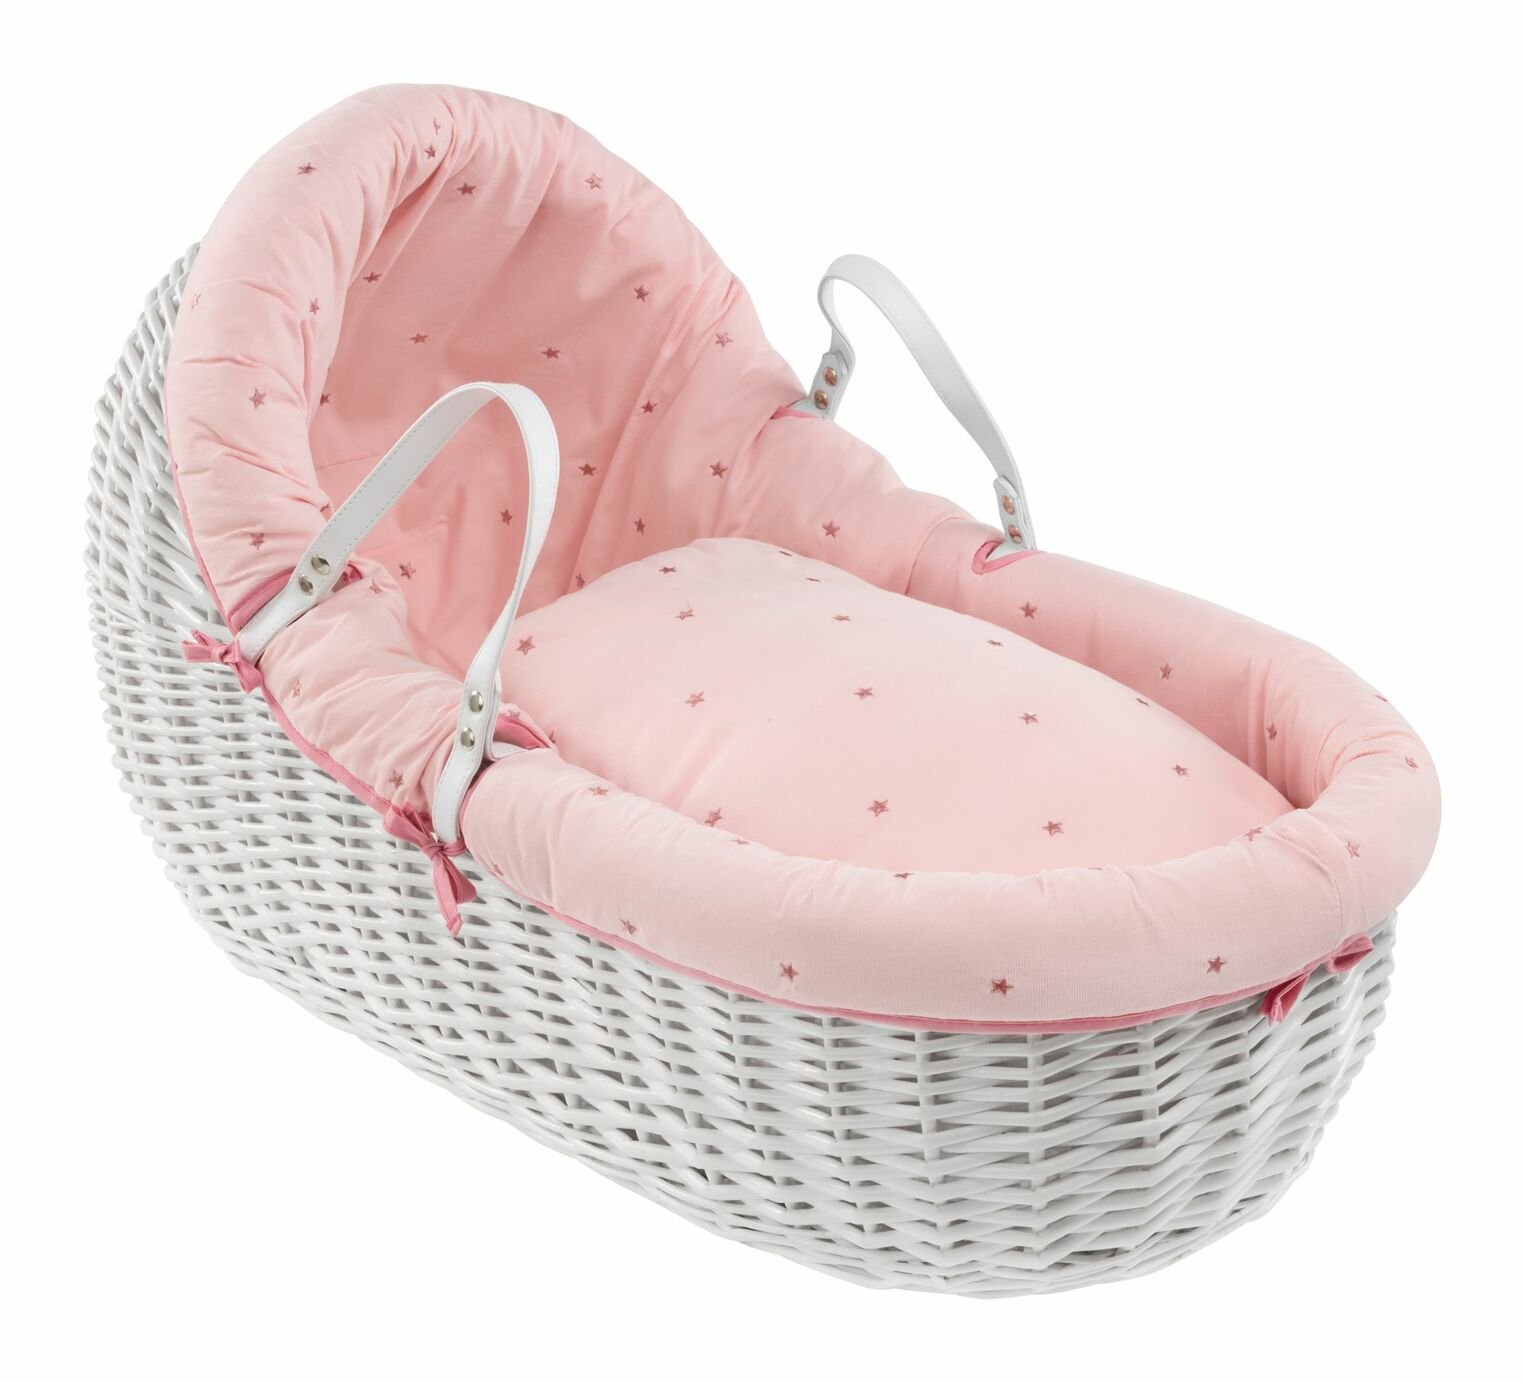 Clair de Lune Lullaby Stars Willow Bassinet -White